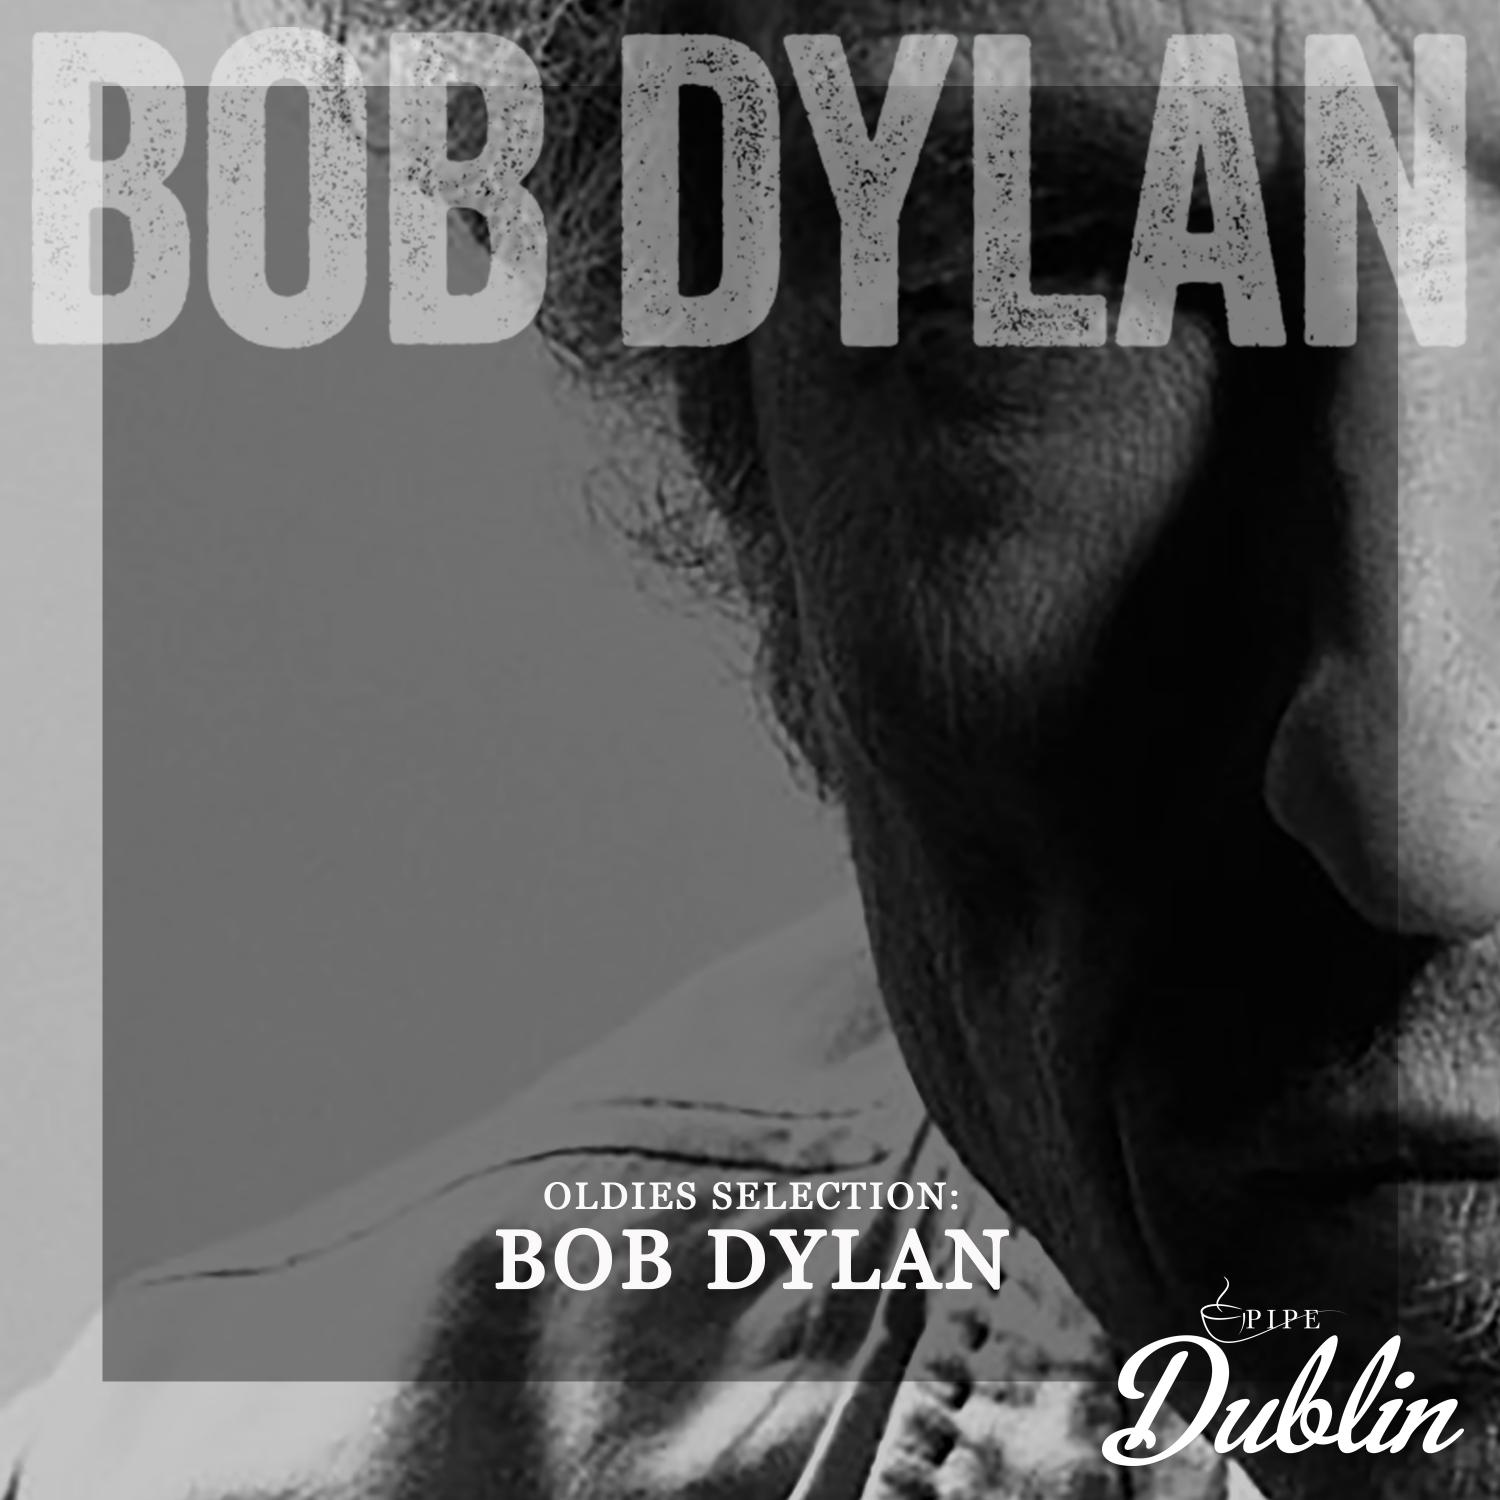 Bob Dylan - Fixin' to Die